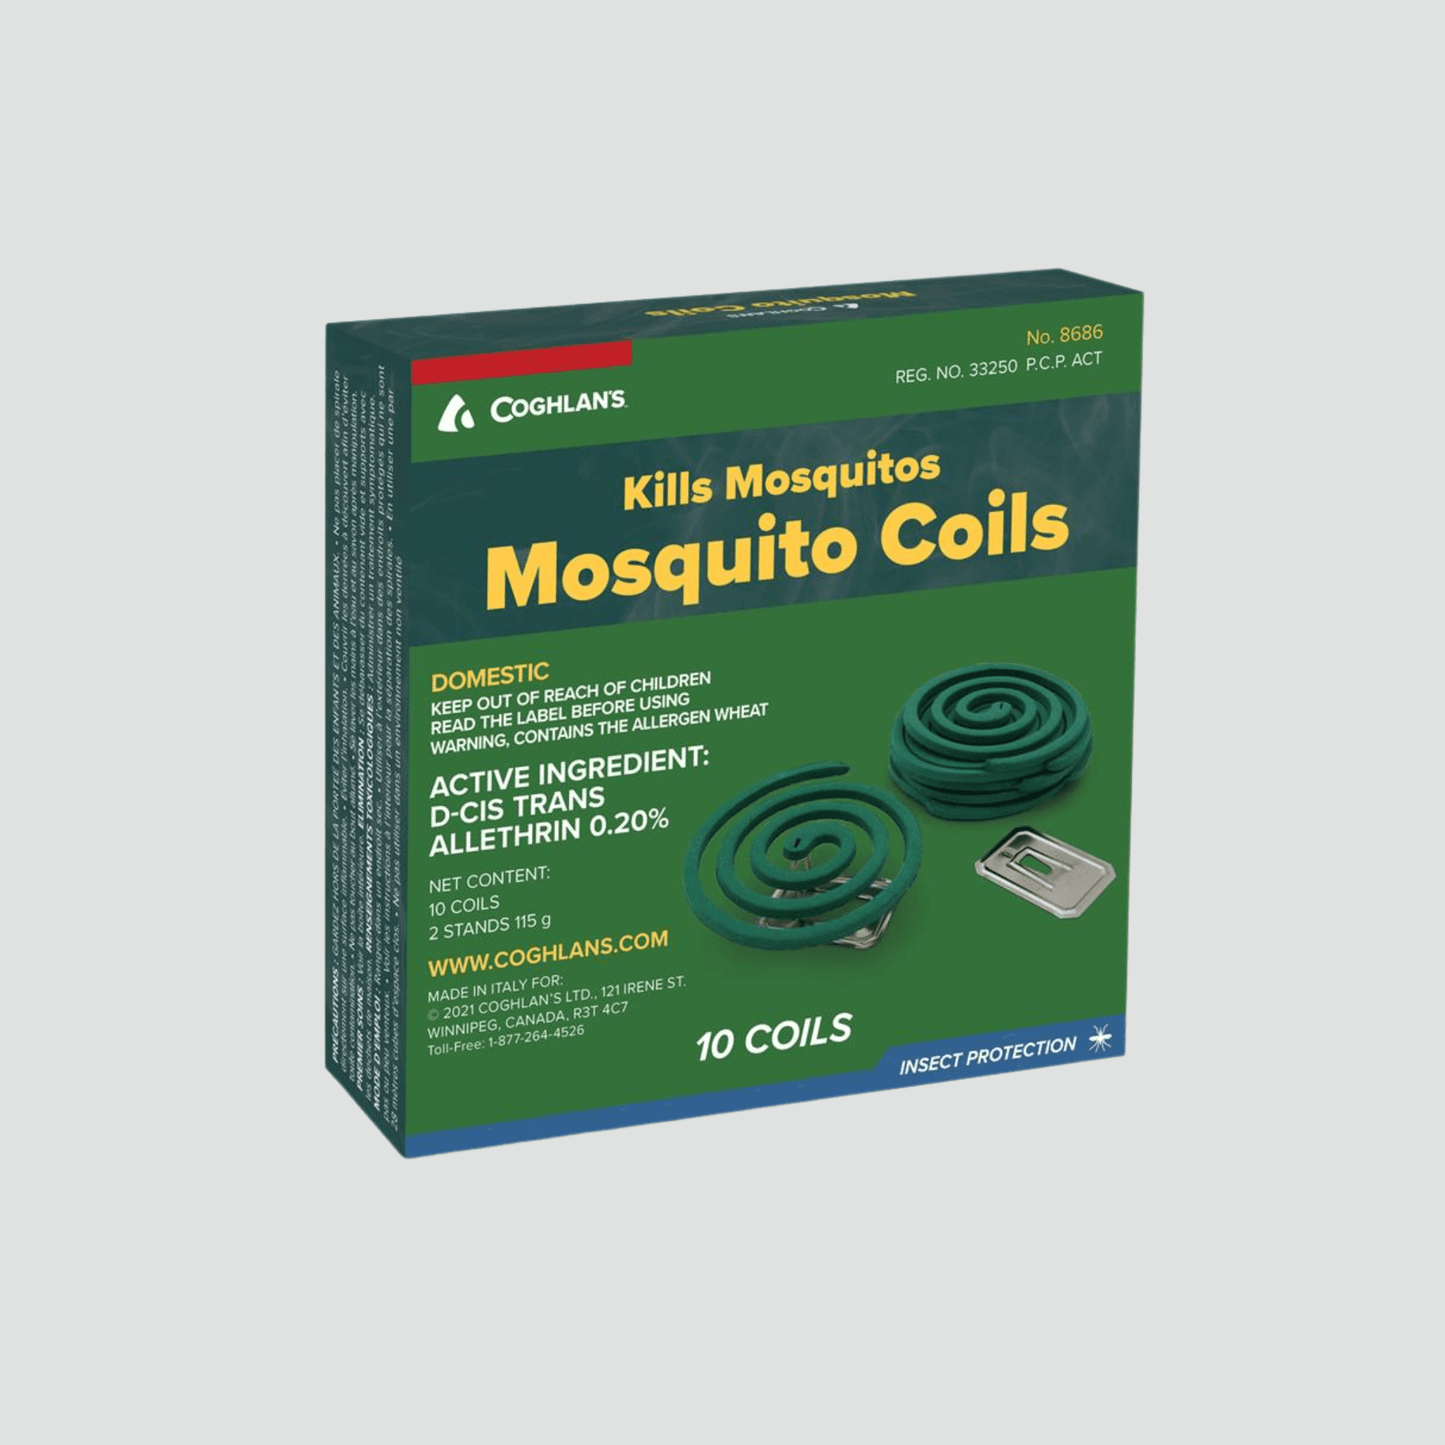 10 Mosquito coils in one package.